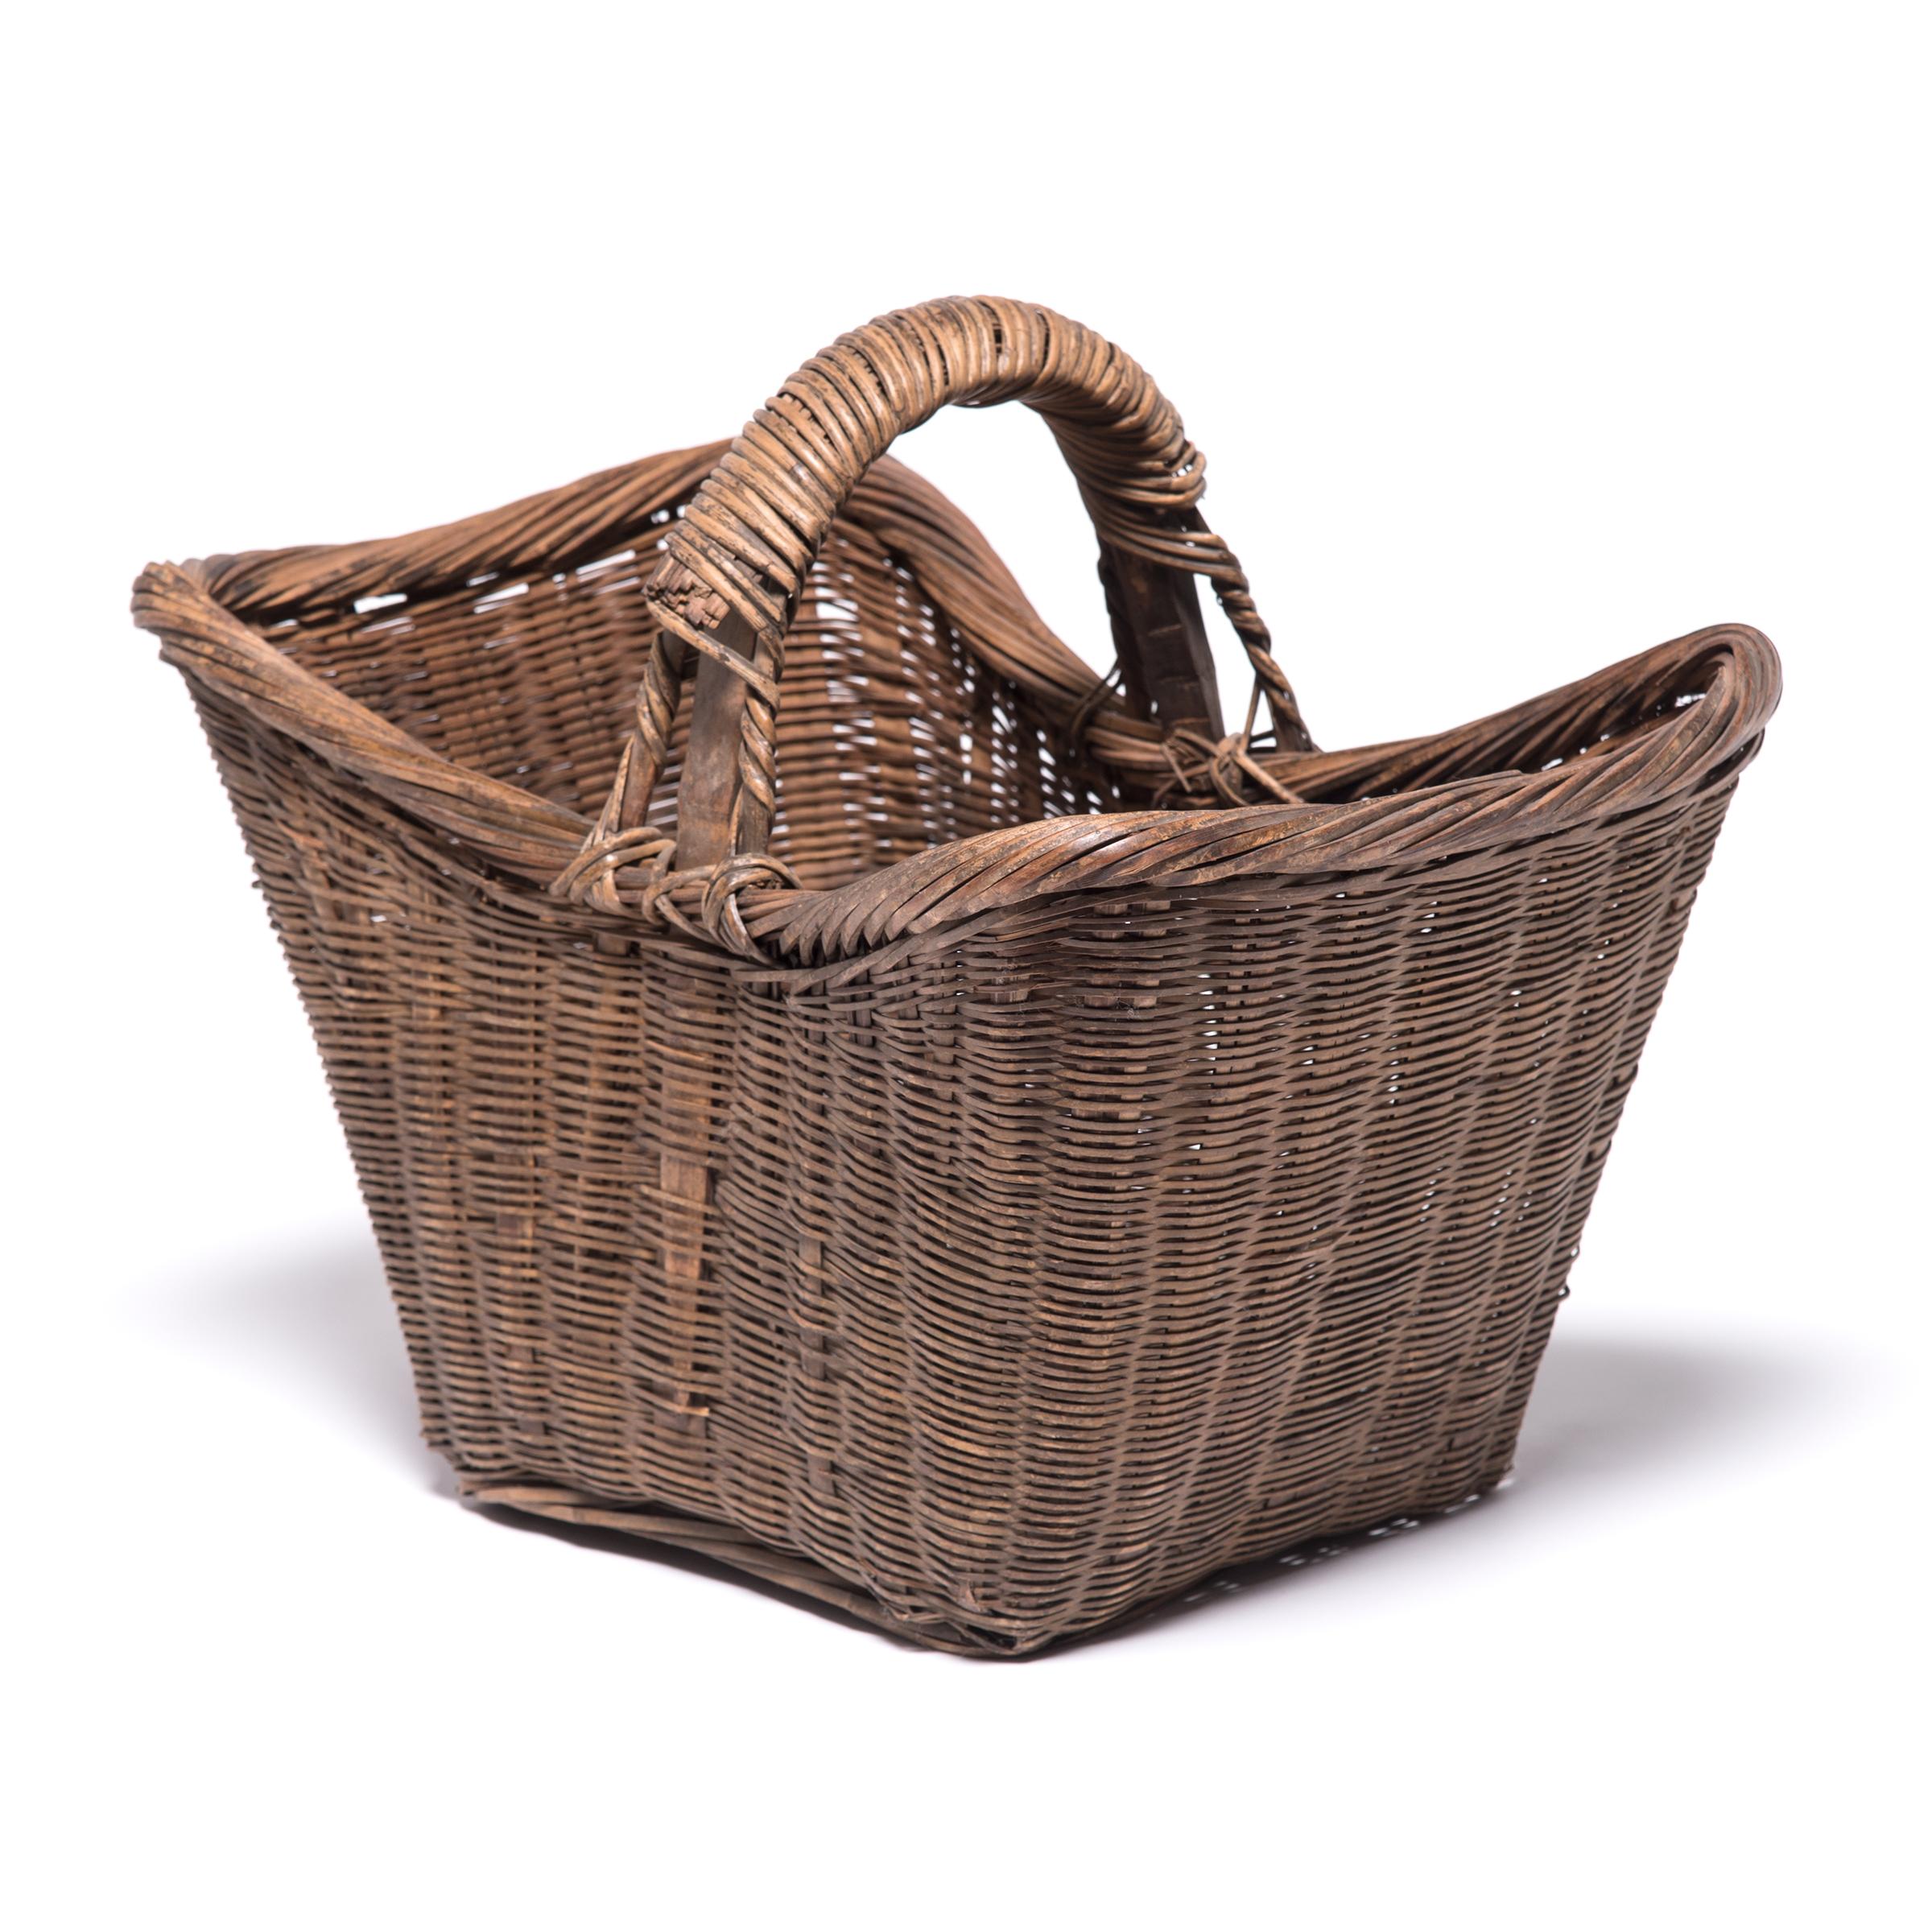 It's easy to imagine someone, long ago, walking to market on a beautiful summer day with this beautiful basket slung over their arm. Basket making is an ancient and humble craft, but in the hands of a truly skilled weaver willow branches, like